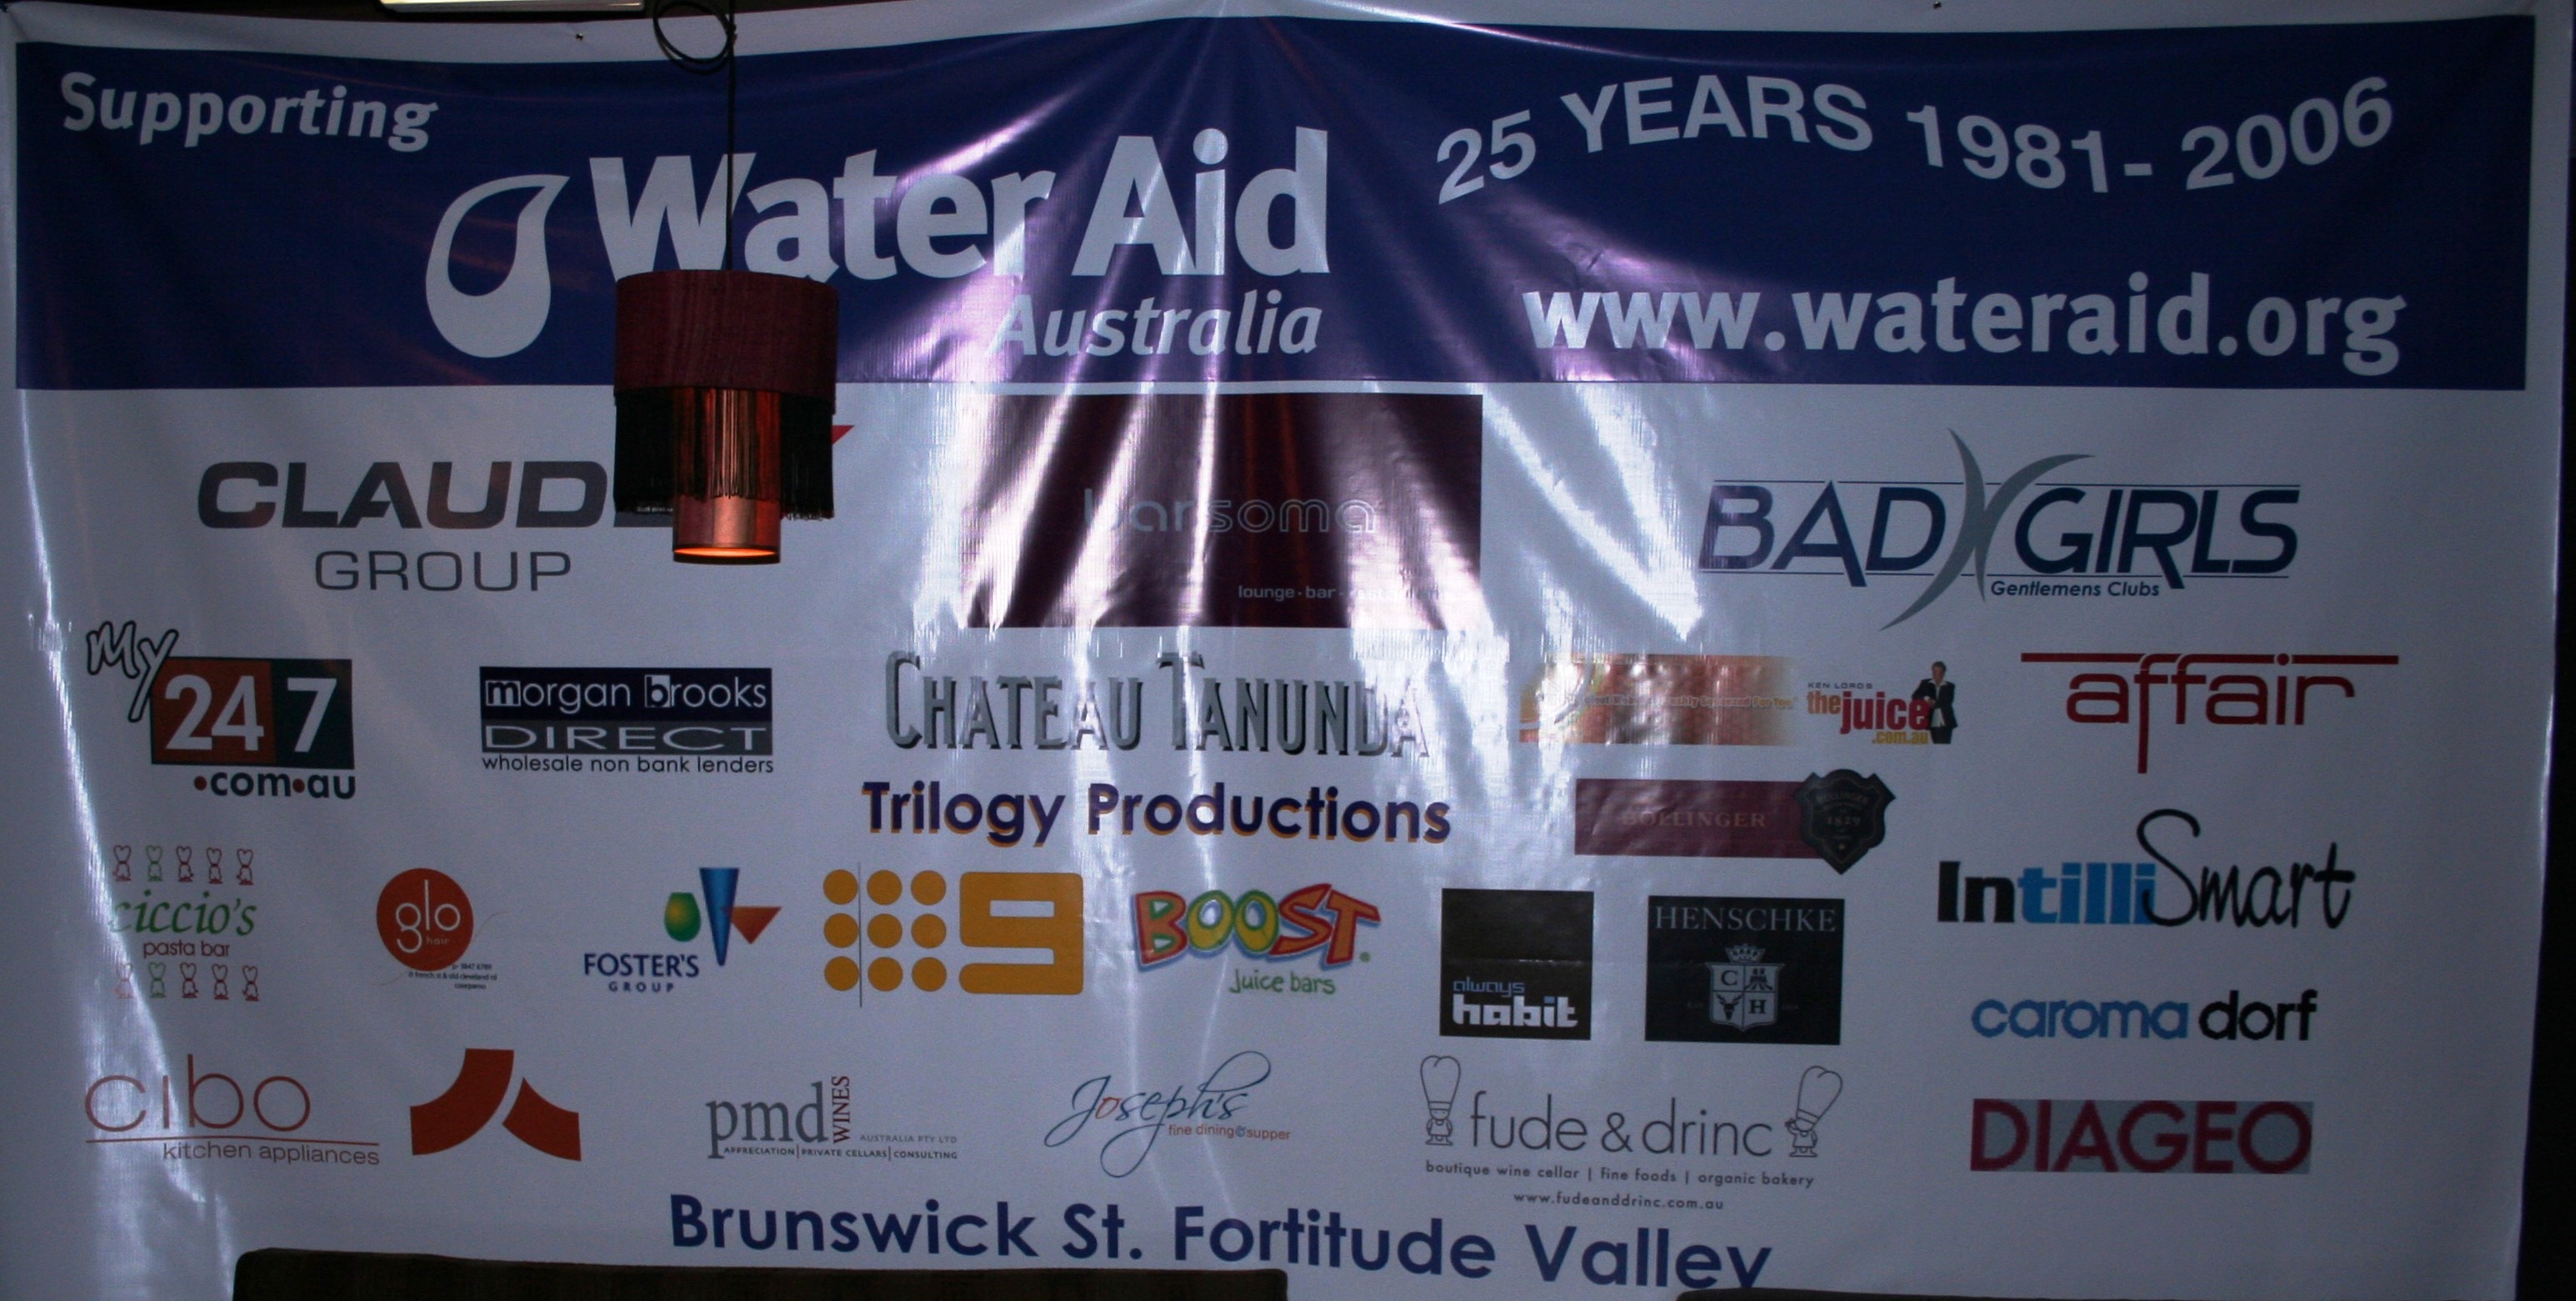 WaterAid sponsor and supporters, photo taken by Chrissy Layton, AusNotebook Music & Creative